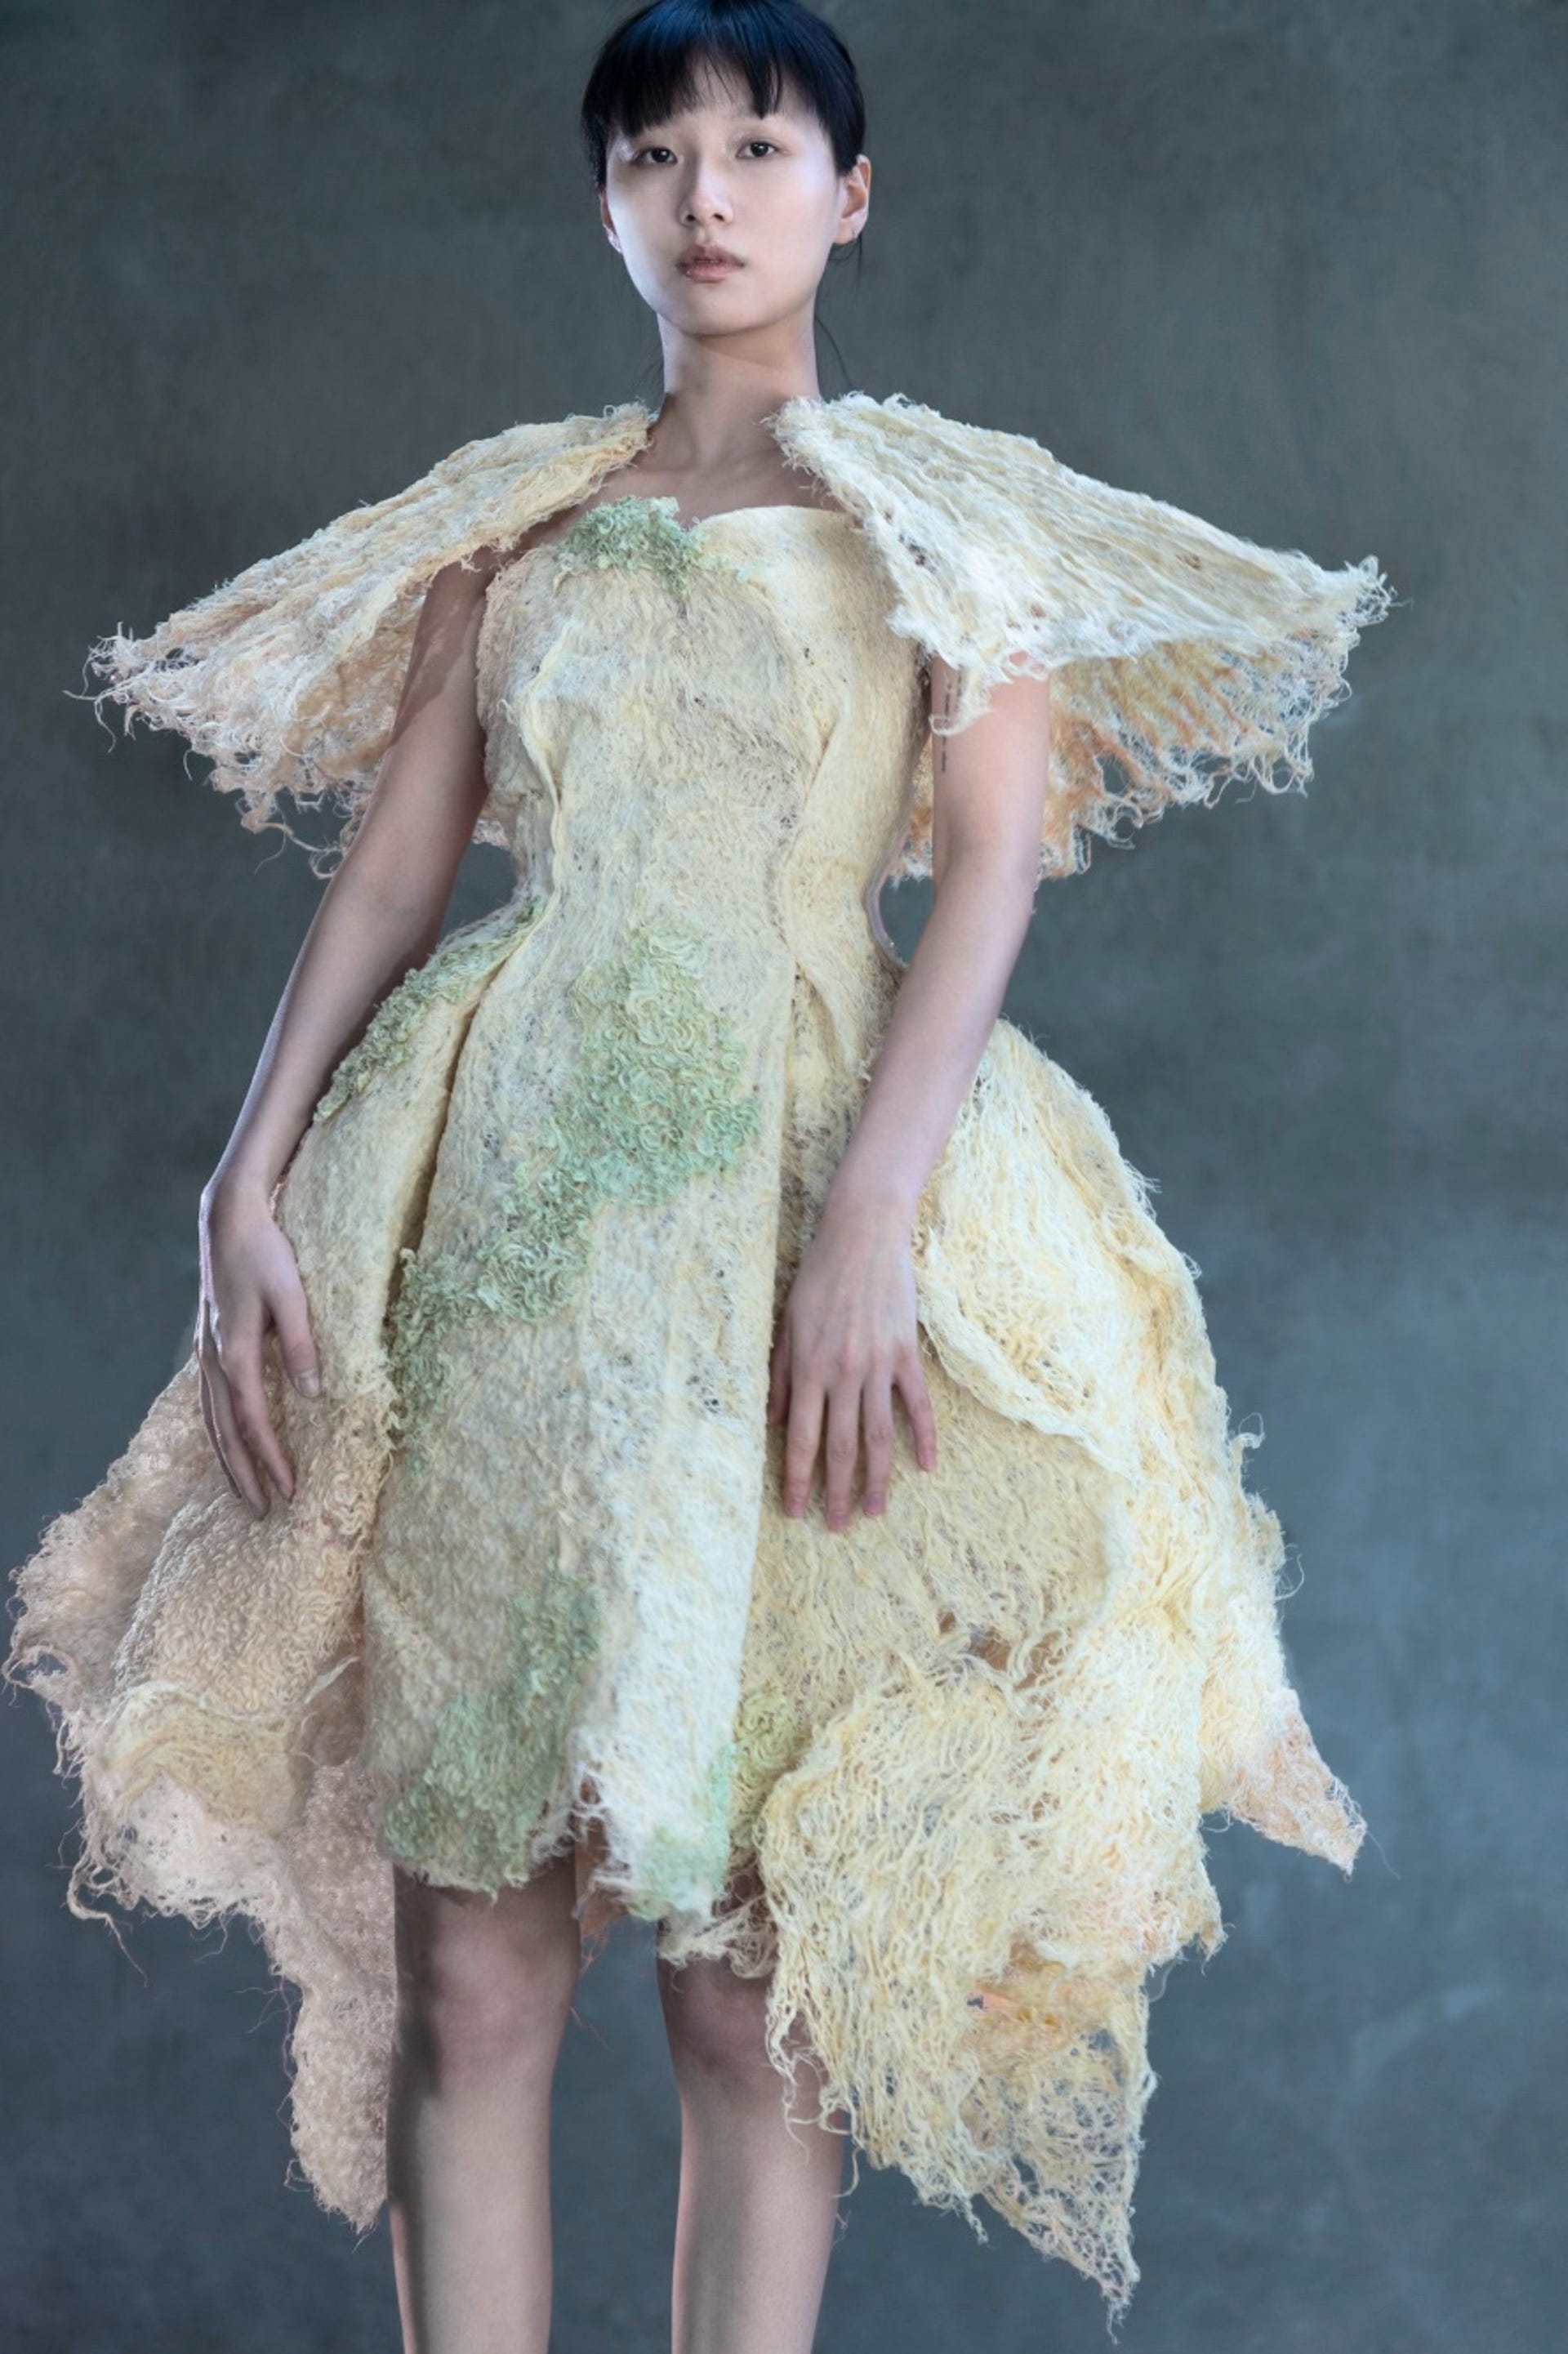 These Garments Grown From Seeds Are Gorgeous, and Compostable - CNET